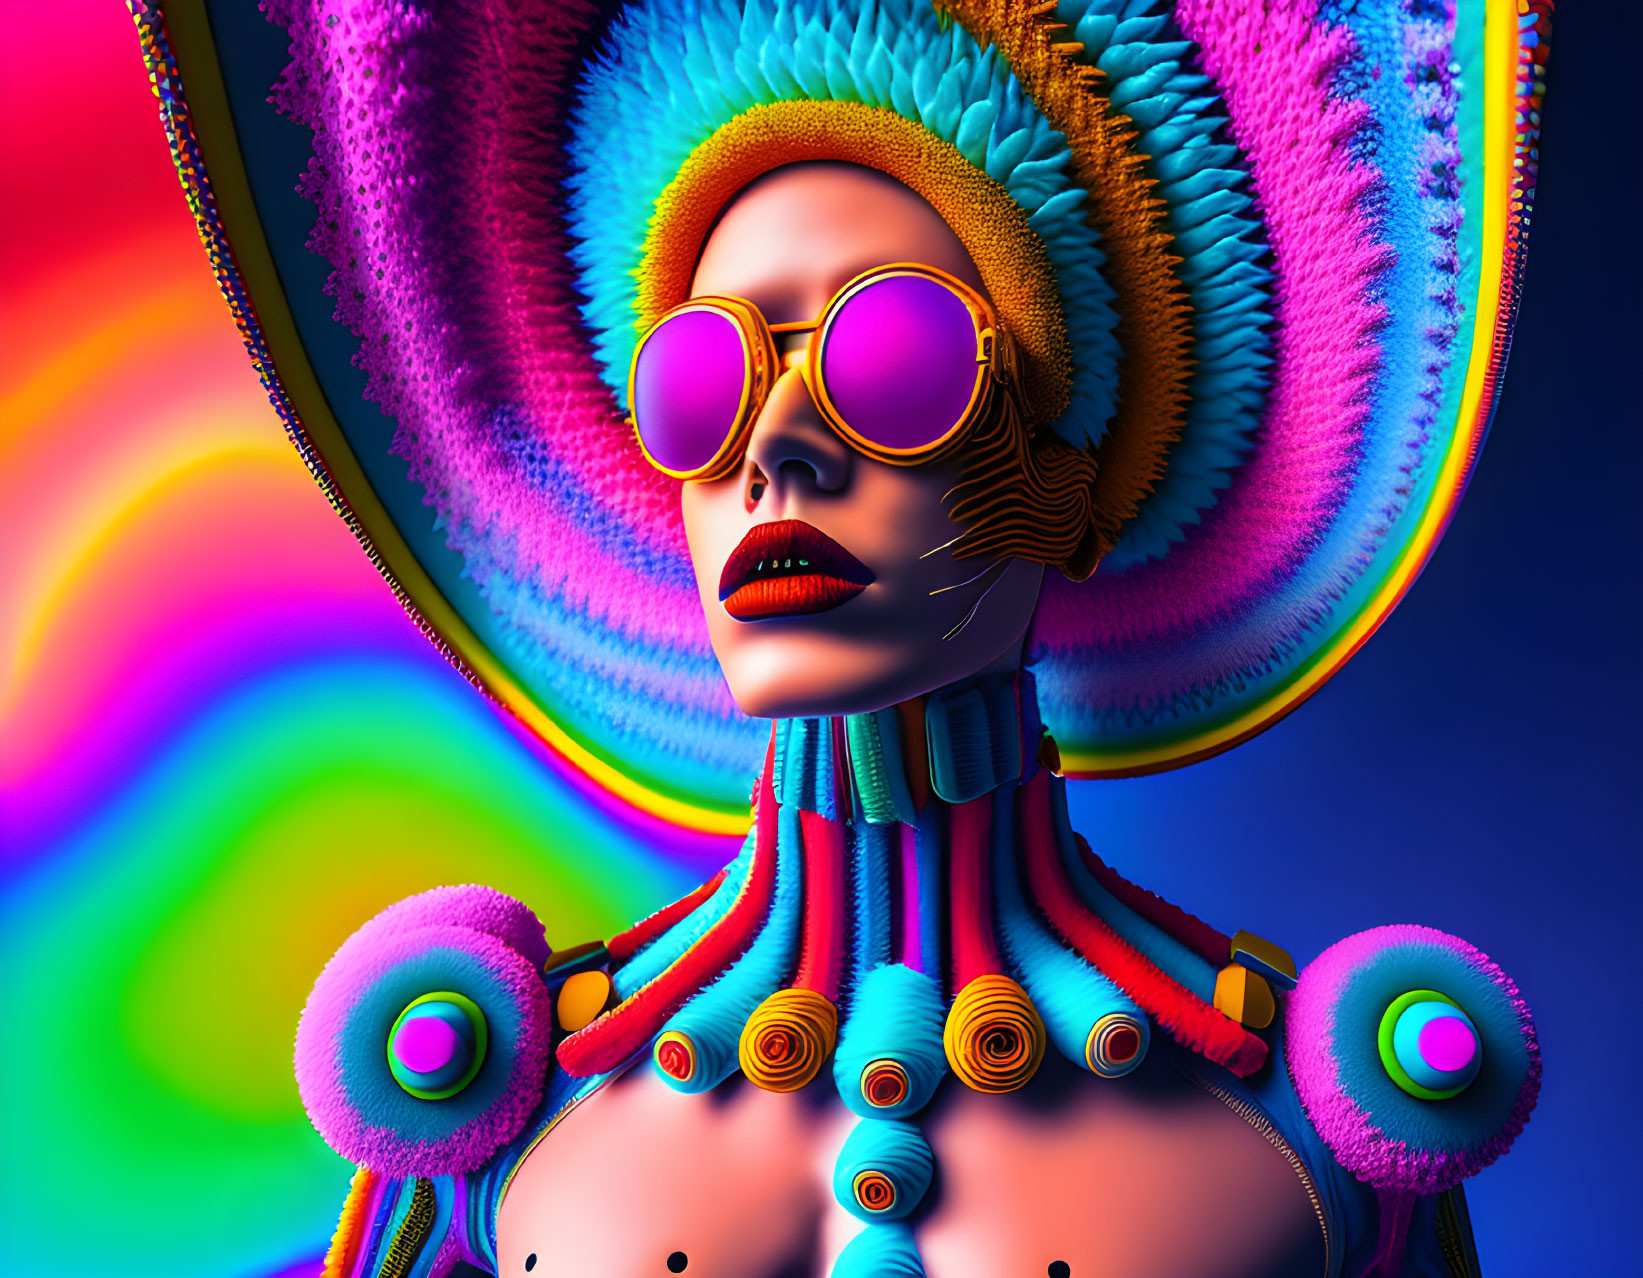 Colorful digital artwork of stylized female figure with headgear and sunglasses